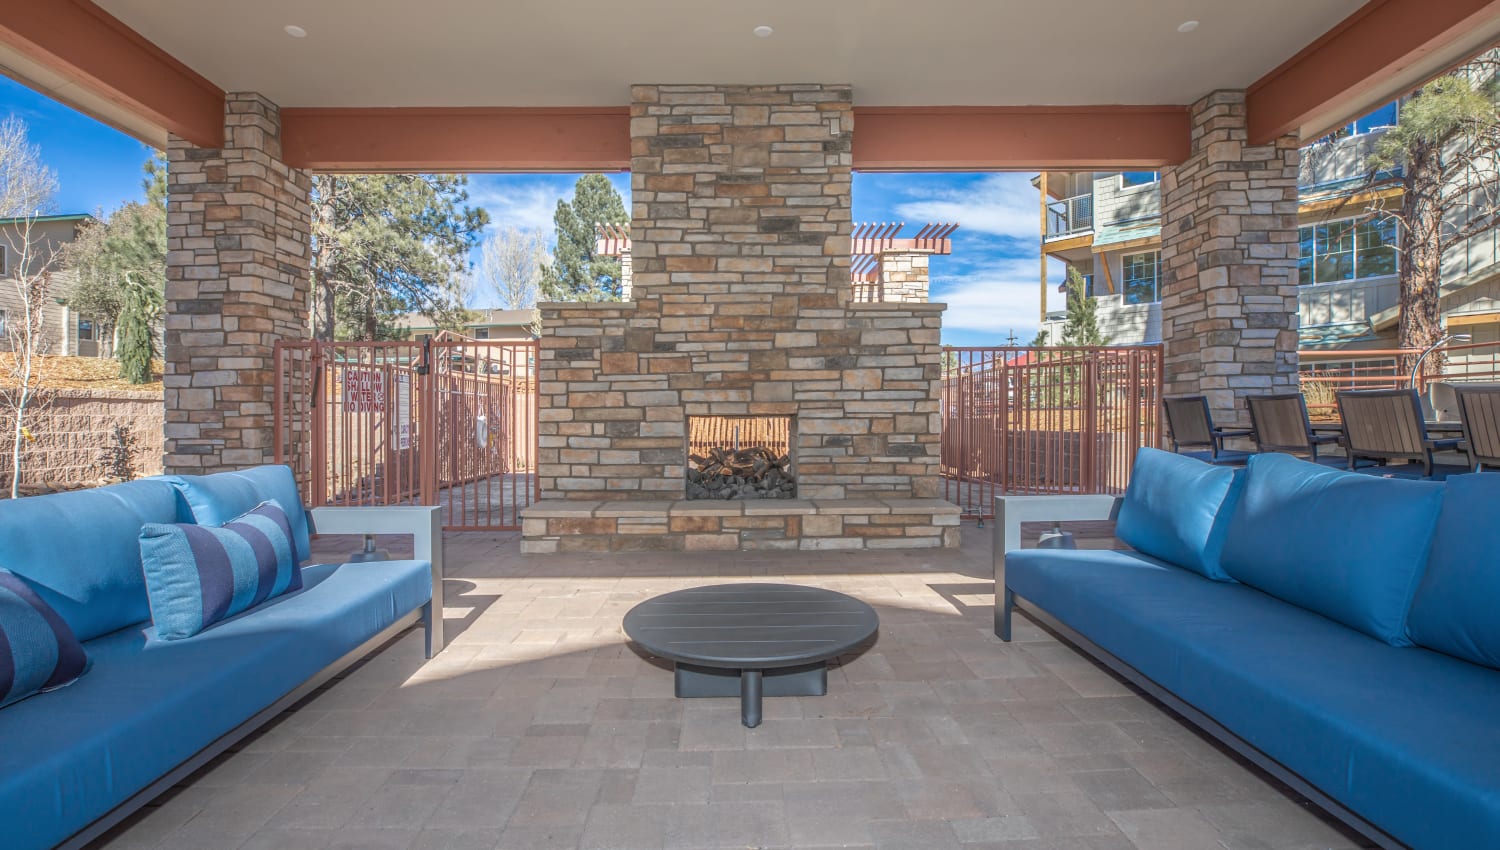 Outdoor fireplace at Trailside Apartments in Flagstaff, Arizona